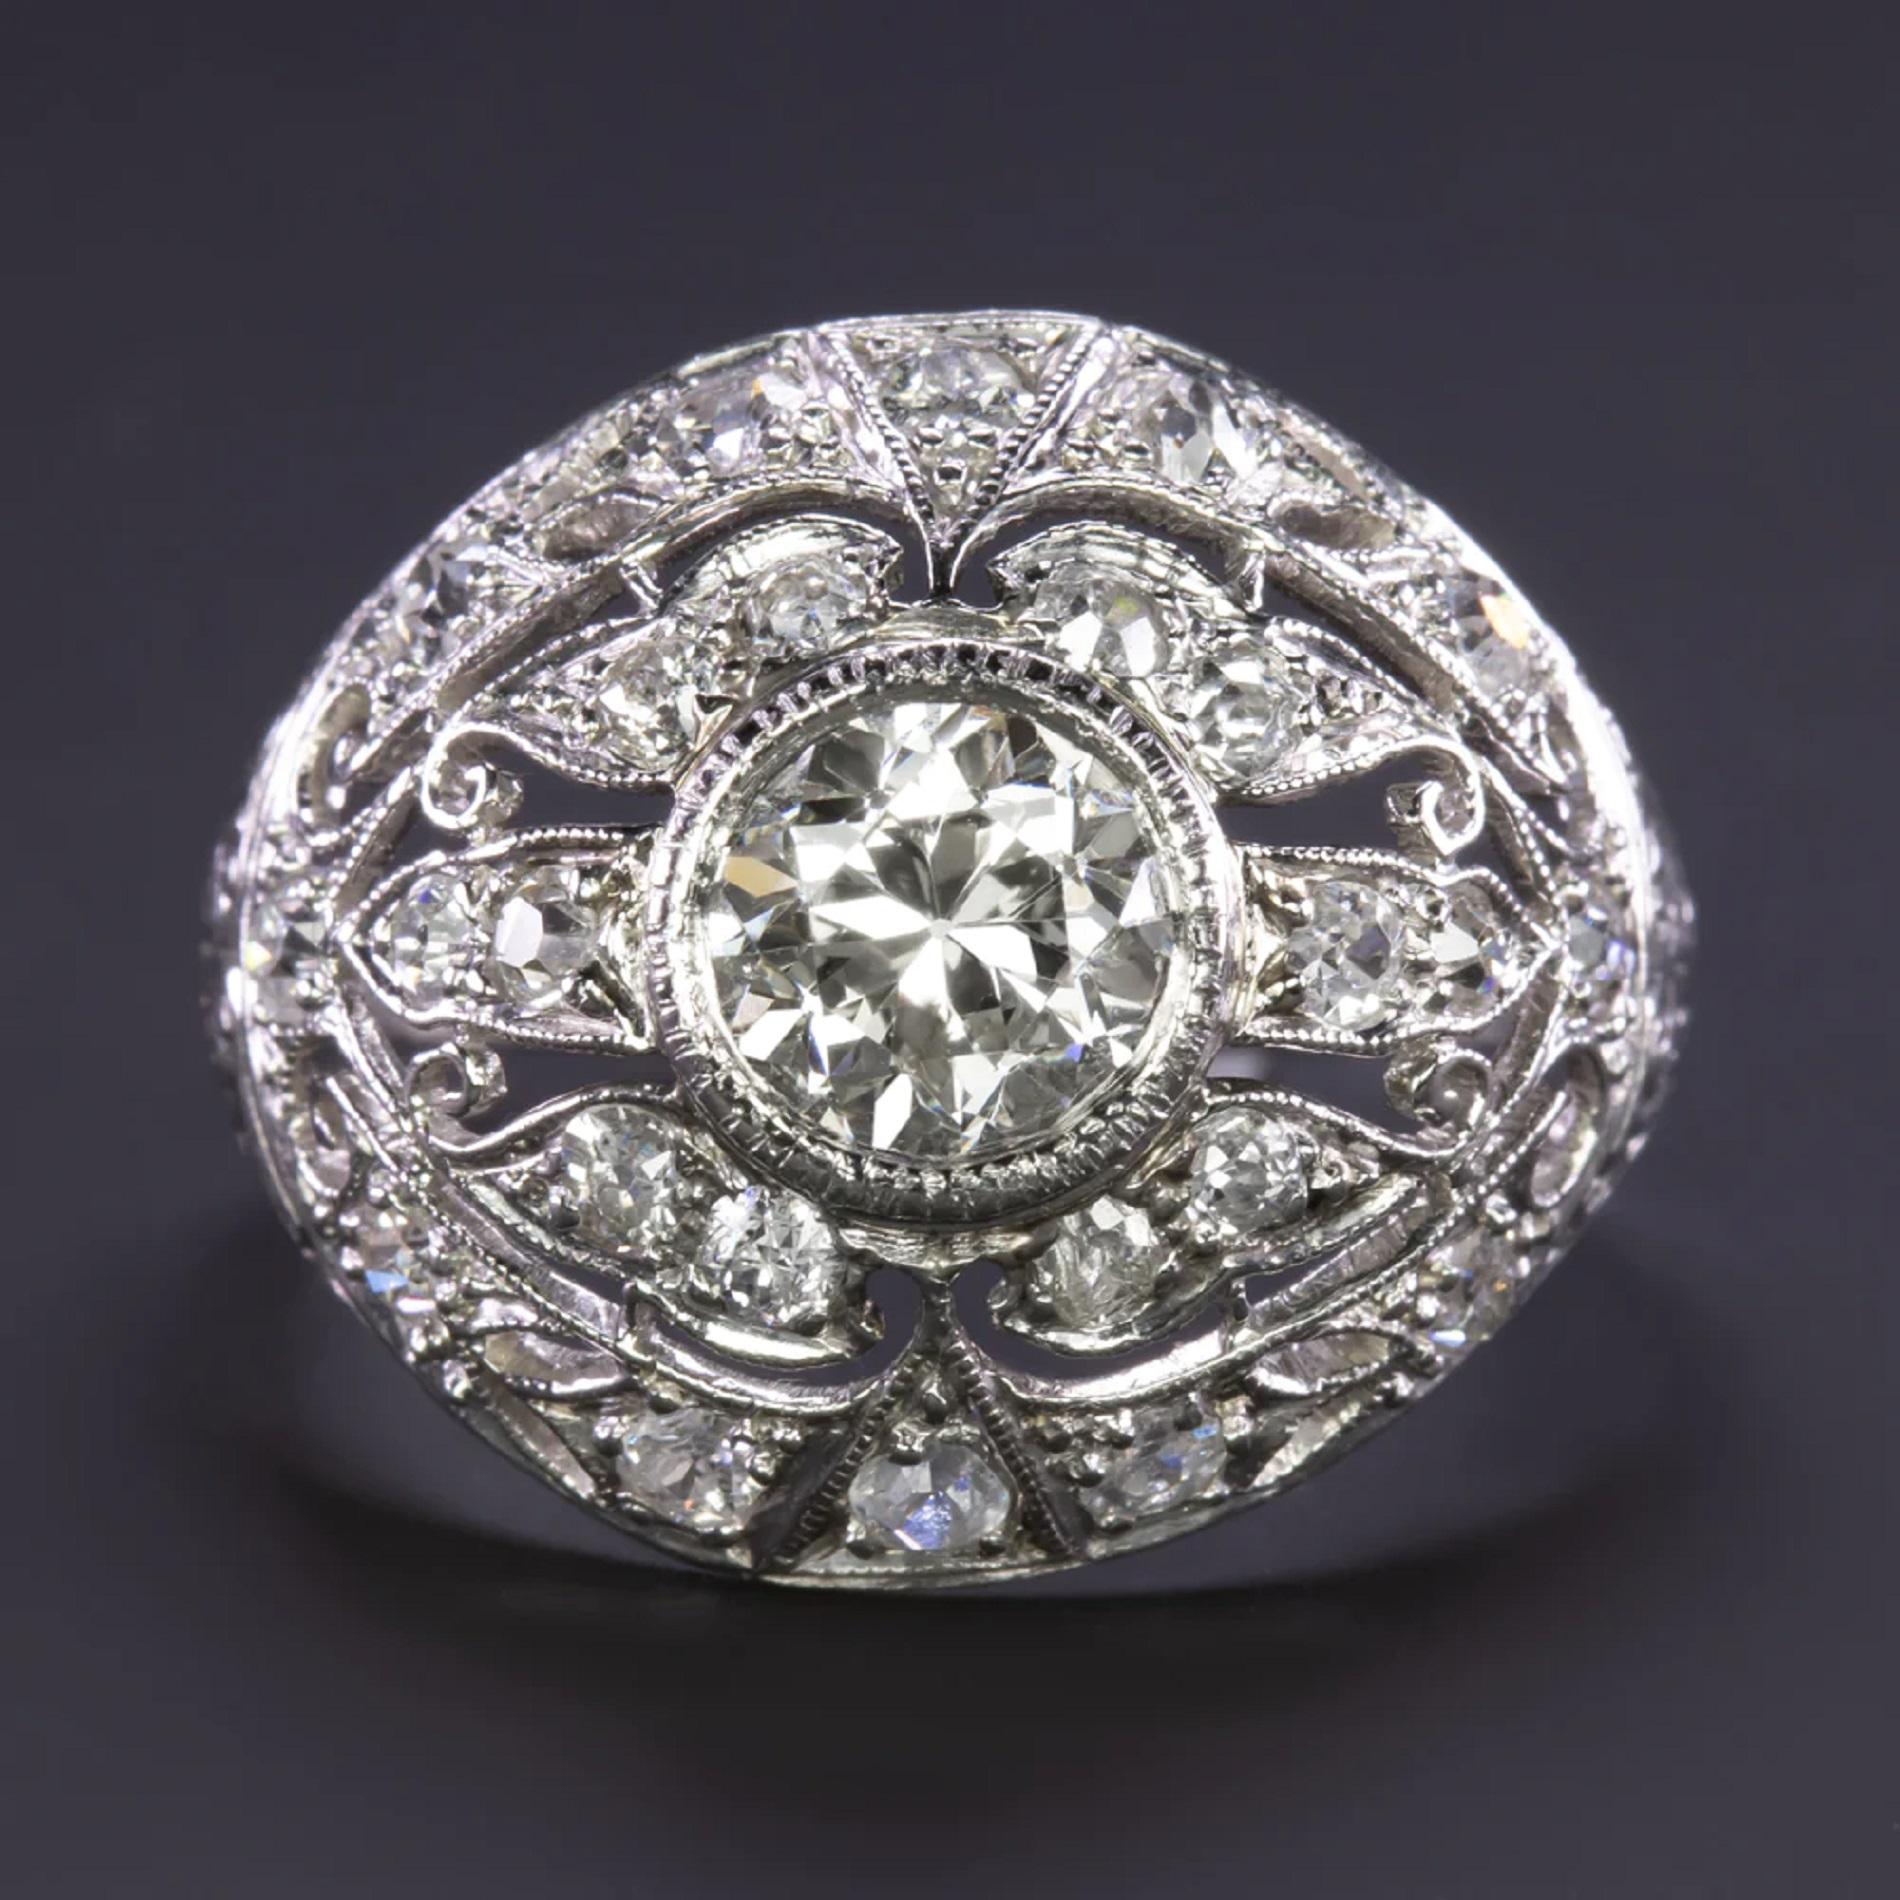 vintage cocktail ring is an absolute sparkle bomb with a 1.31ct old European cut diamond center and 0.83 additional carats on the sides! Crafted in the Art Deco era, the platinum setting is beautifully designed with a domed shape, engraving,